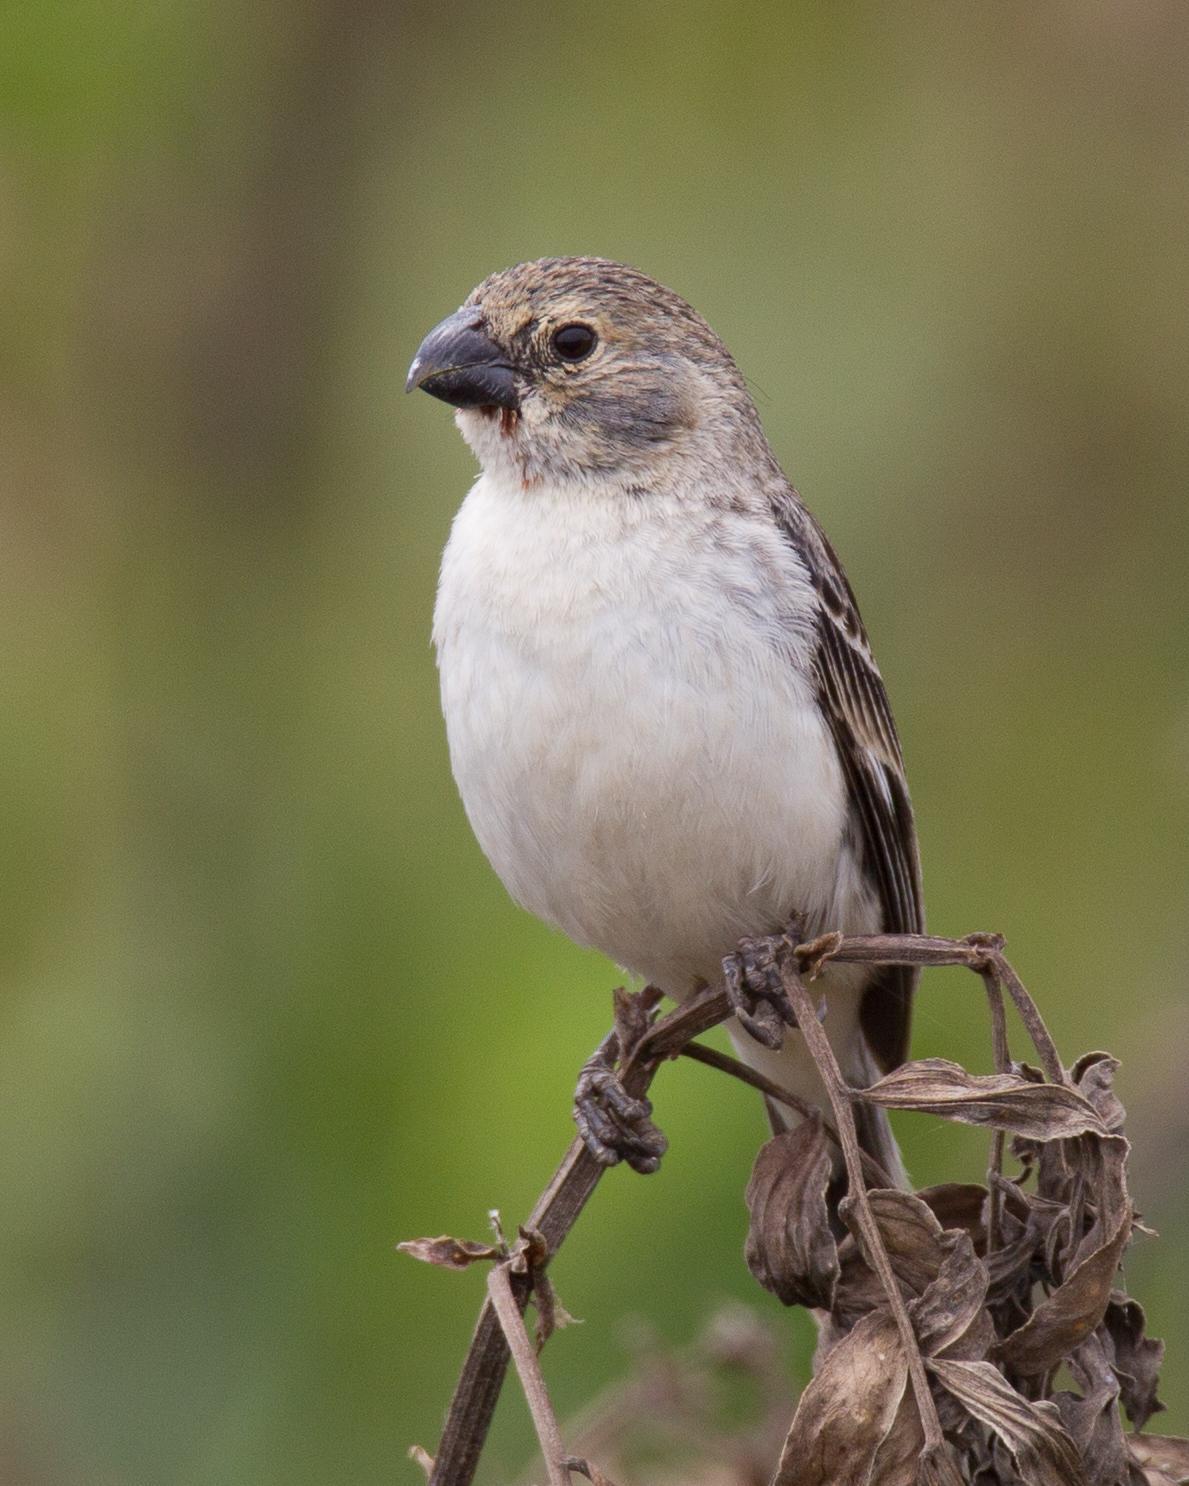 Chestnut-throated Seedeater Photo by Robert Lewis